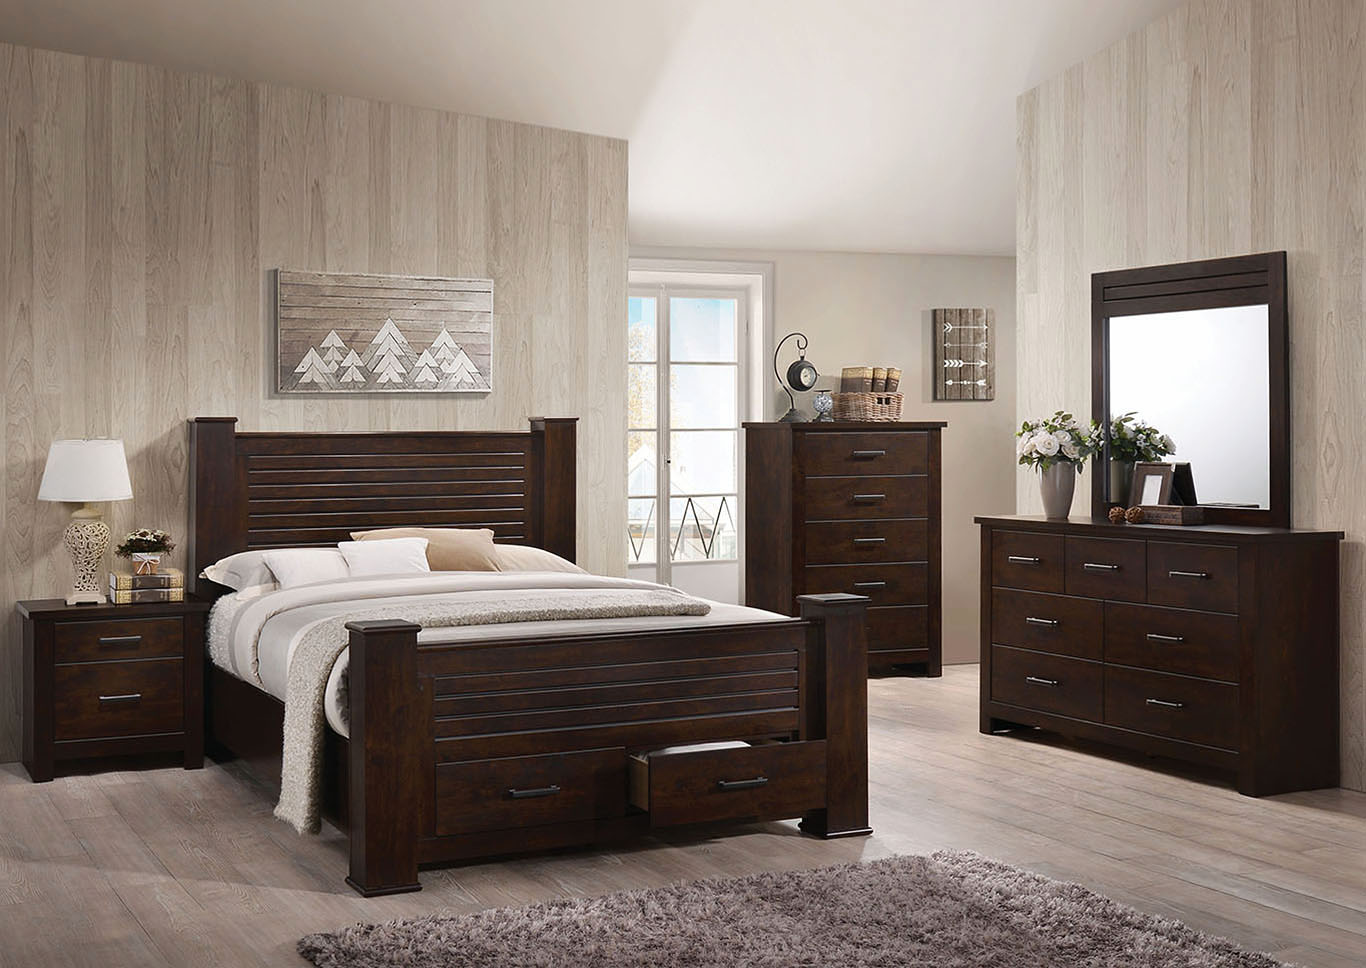 Panang Brown Queen Storage Bed w/Dresser and Mirror,Acme